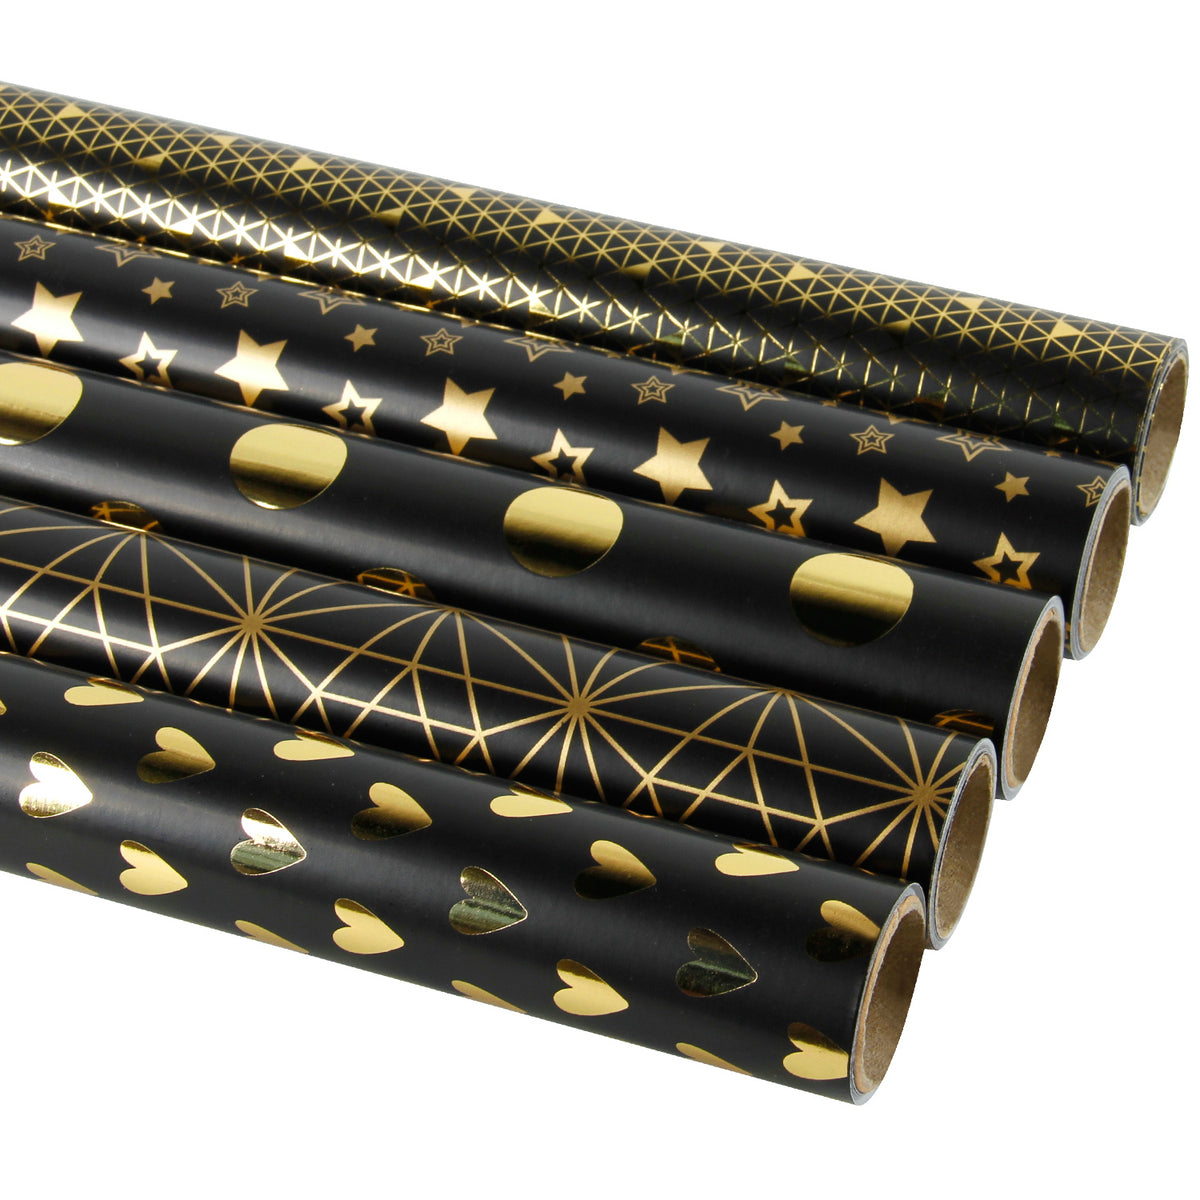 RUSPEPA Gift Wrapping Paper Roll-Multicolor and Gold Foil Pattern for